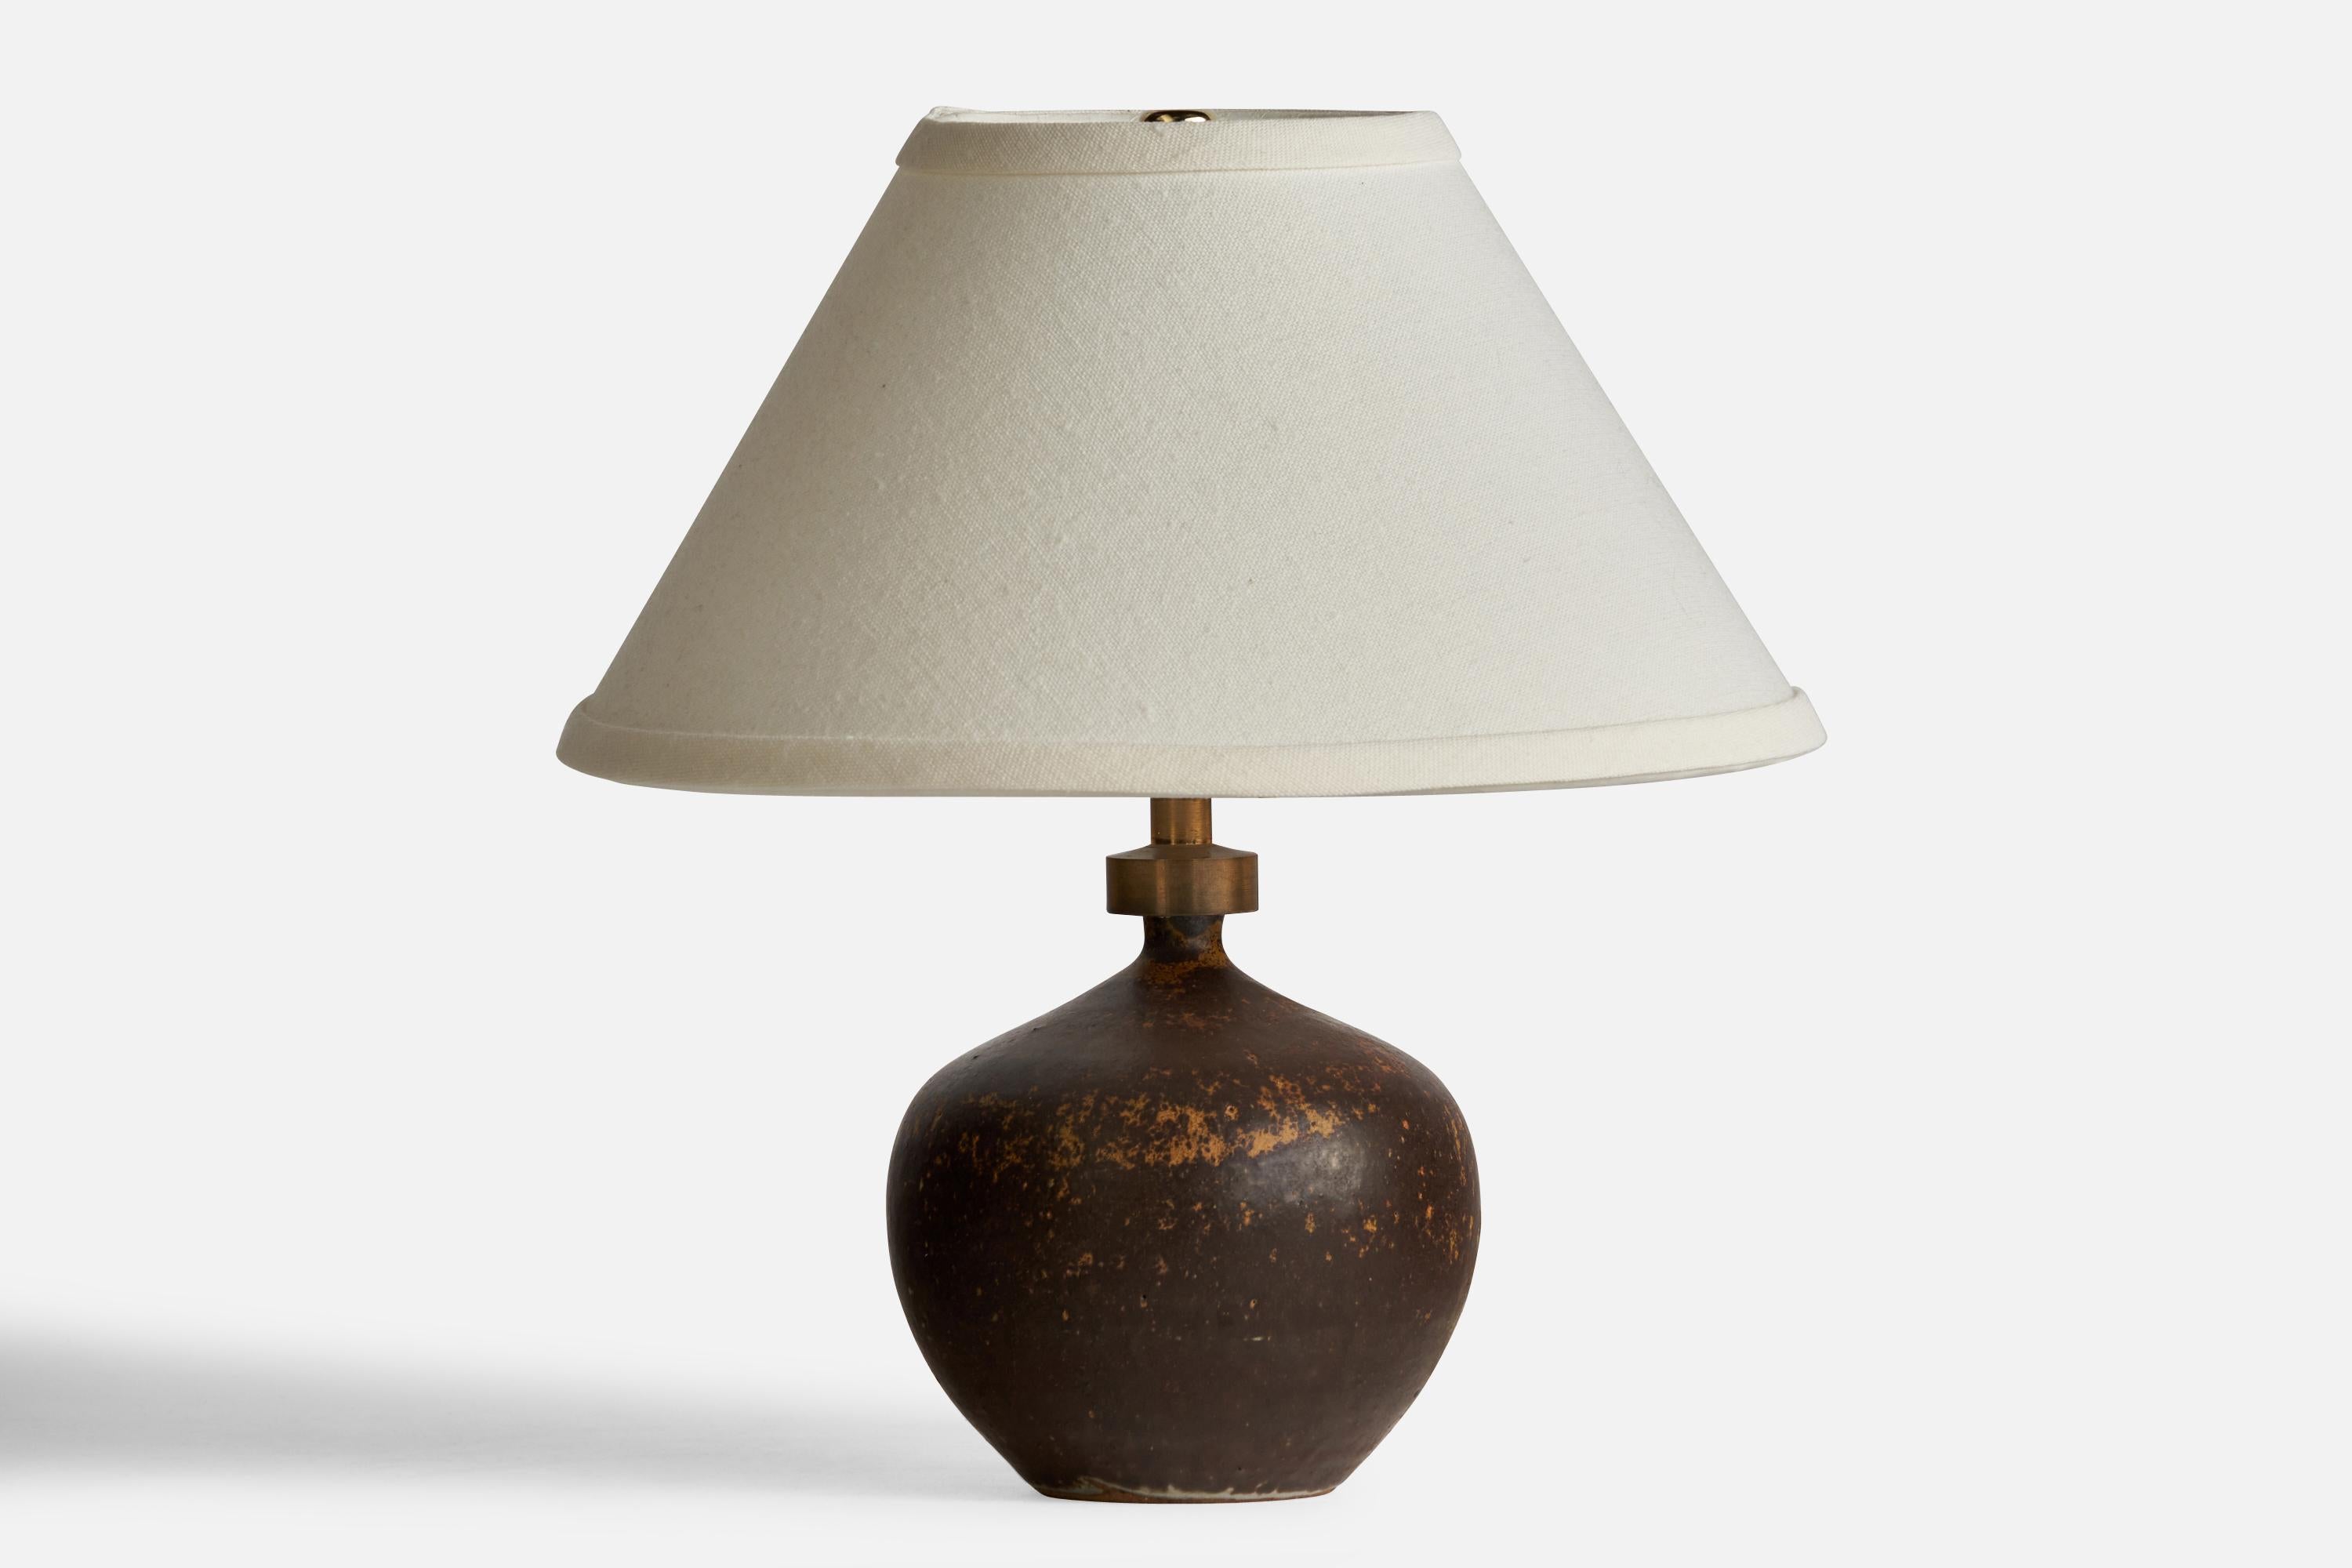 A brown-glazed ceramic and brass table lamp designed and produced by Ove Rasmussen-Vaedelund, Denmark, c. 1960s.

Dimensions of Lamp (inches): 8” H x 4.75” Diameter
Dimensions of Shade (inches): 4” Top Diameter x 10” Bottom Diameter x 5.5”